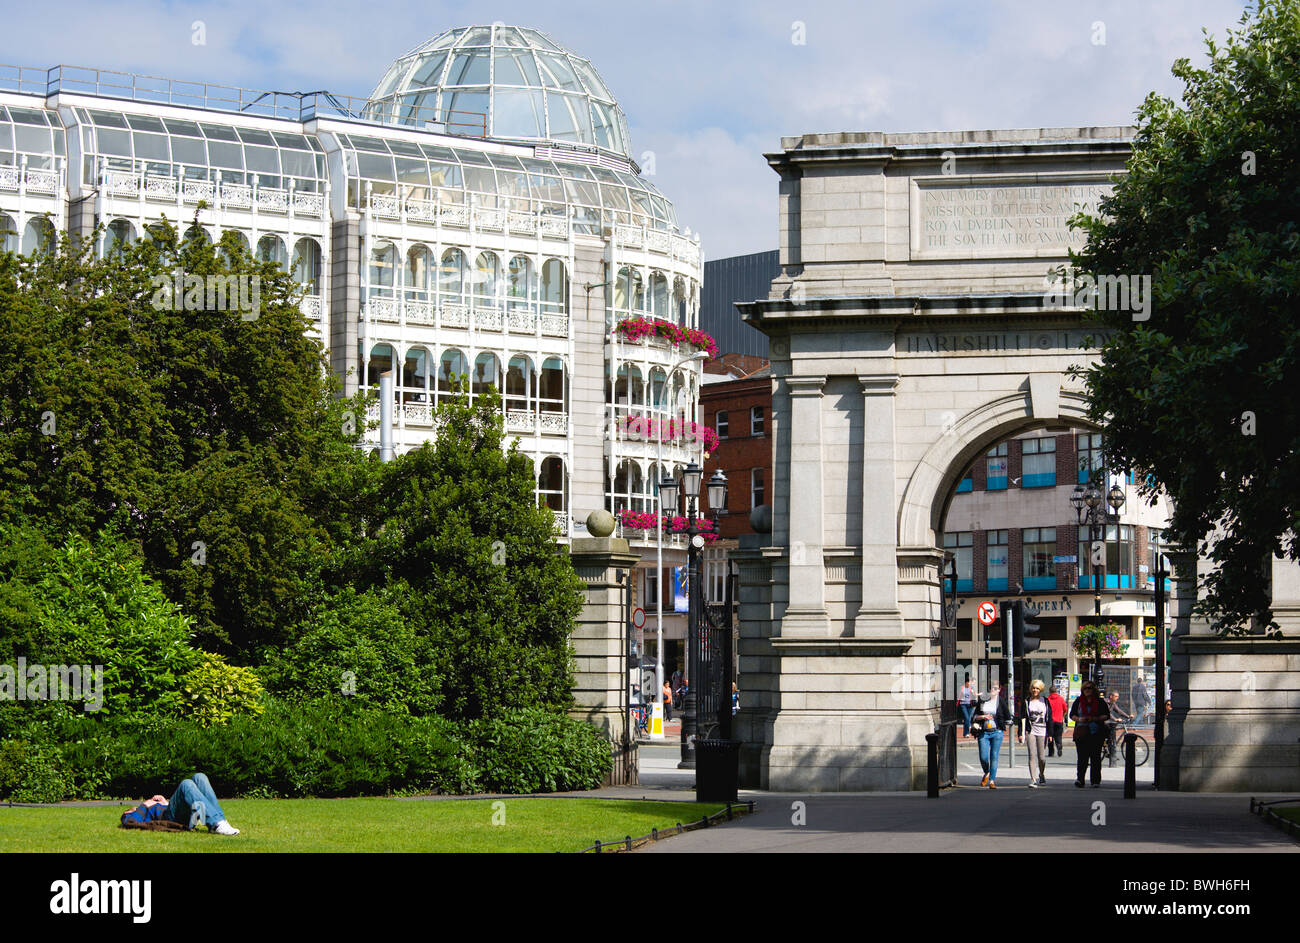 Ireland, County Dublin, Dublin City, Saint Stephen's Green shopping arcade and Fusiliers Arch entrance into the park with people Stock Photo